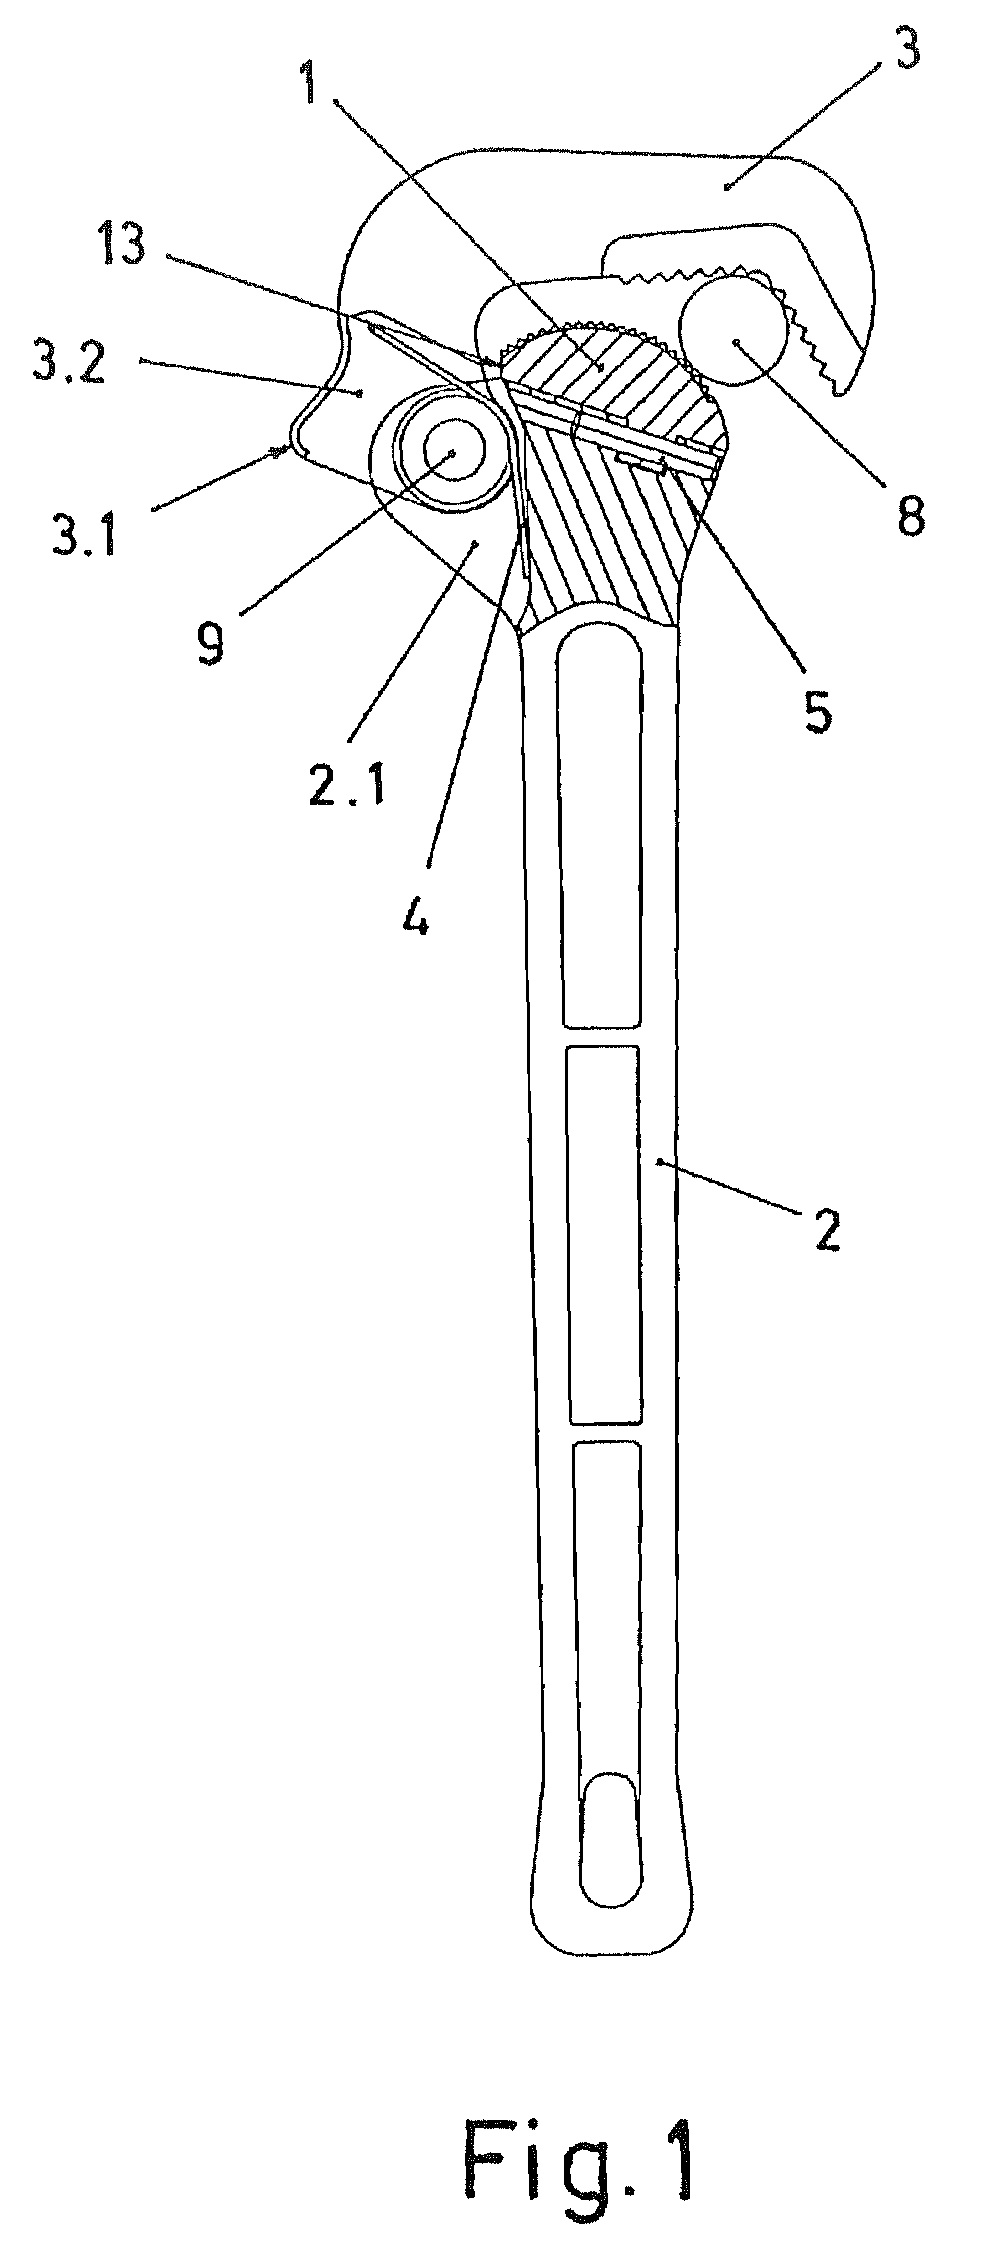 Manual wrench for actuating cylindrical elements